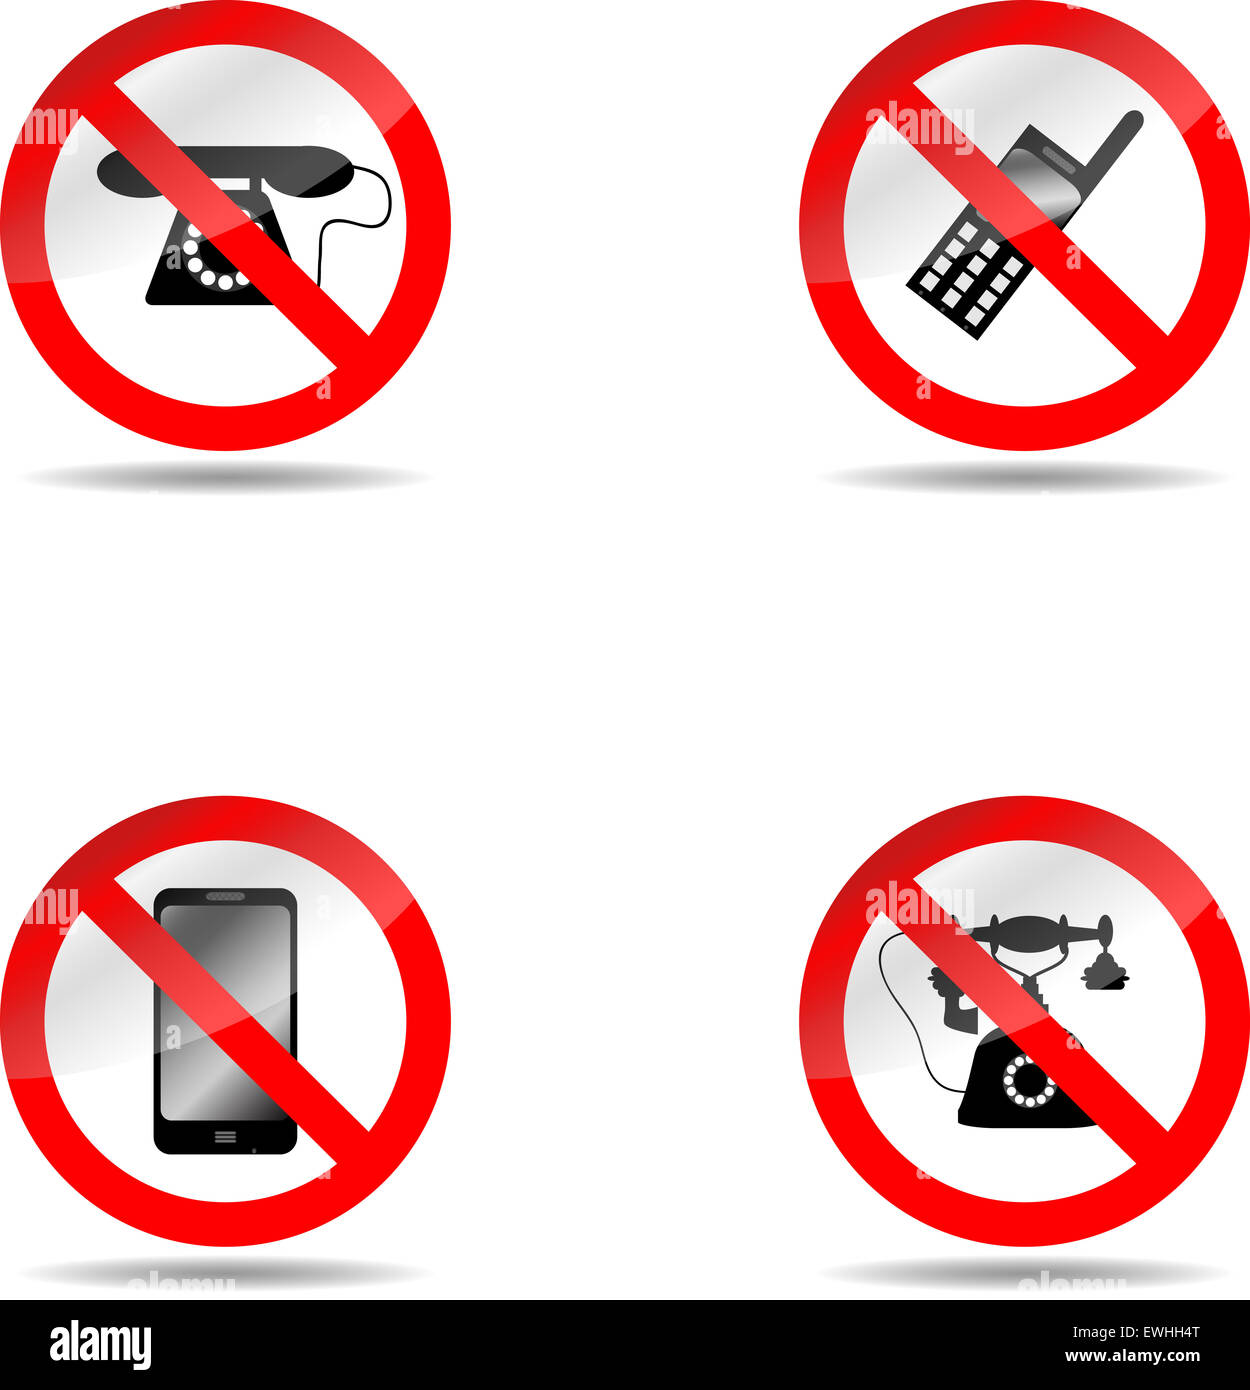 Ban phone set. Forbidden mobile, prohibited sign, call telephone communication, vector graphic illustration Stock Photo